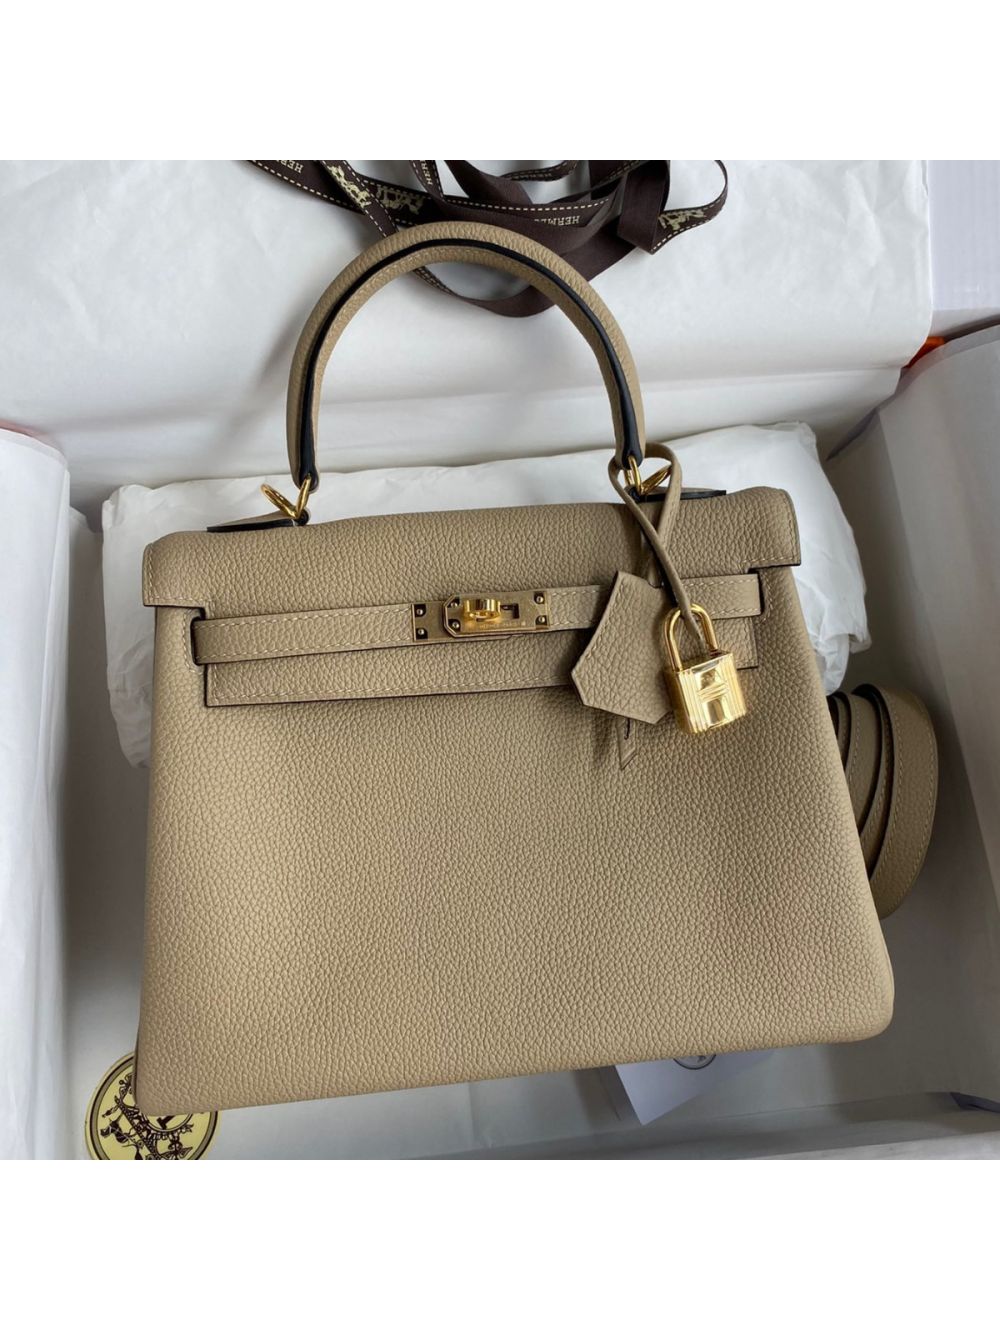 Replica Hermes Kelly Retourne 25 Handmade Bag In Trench Clemence Leather